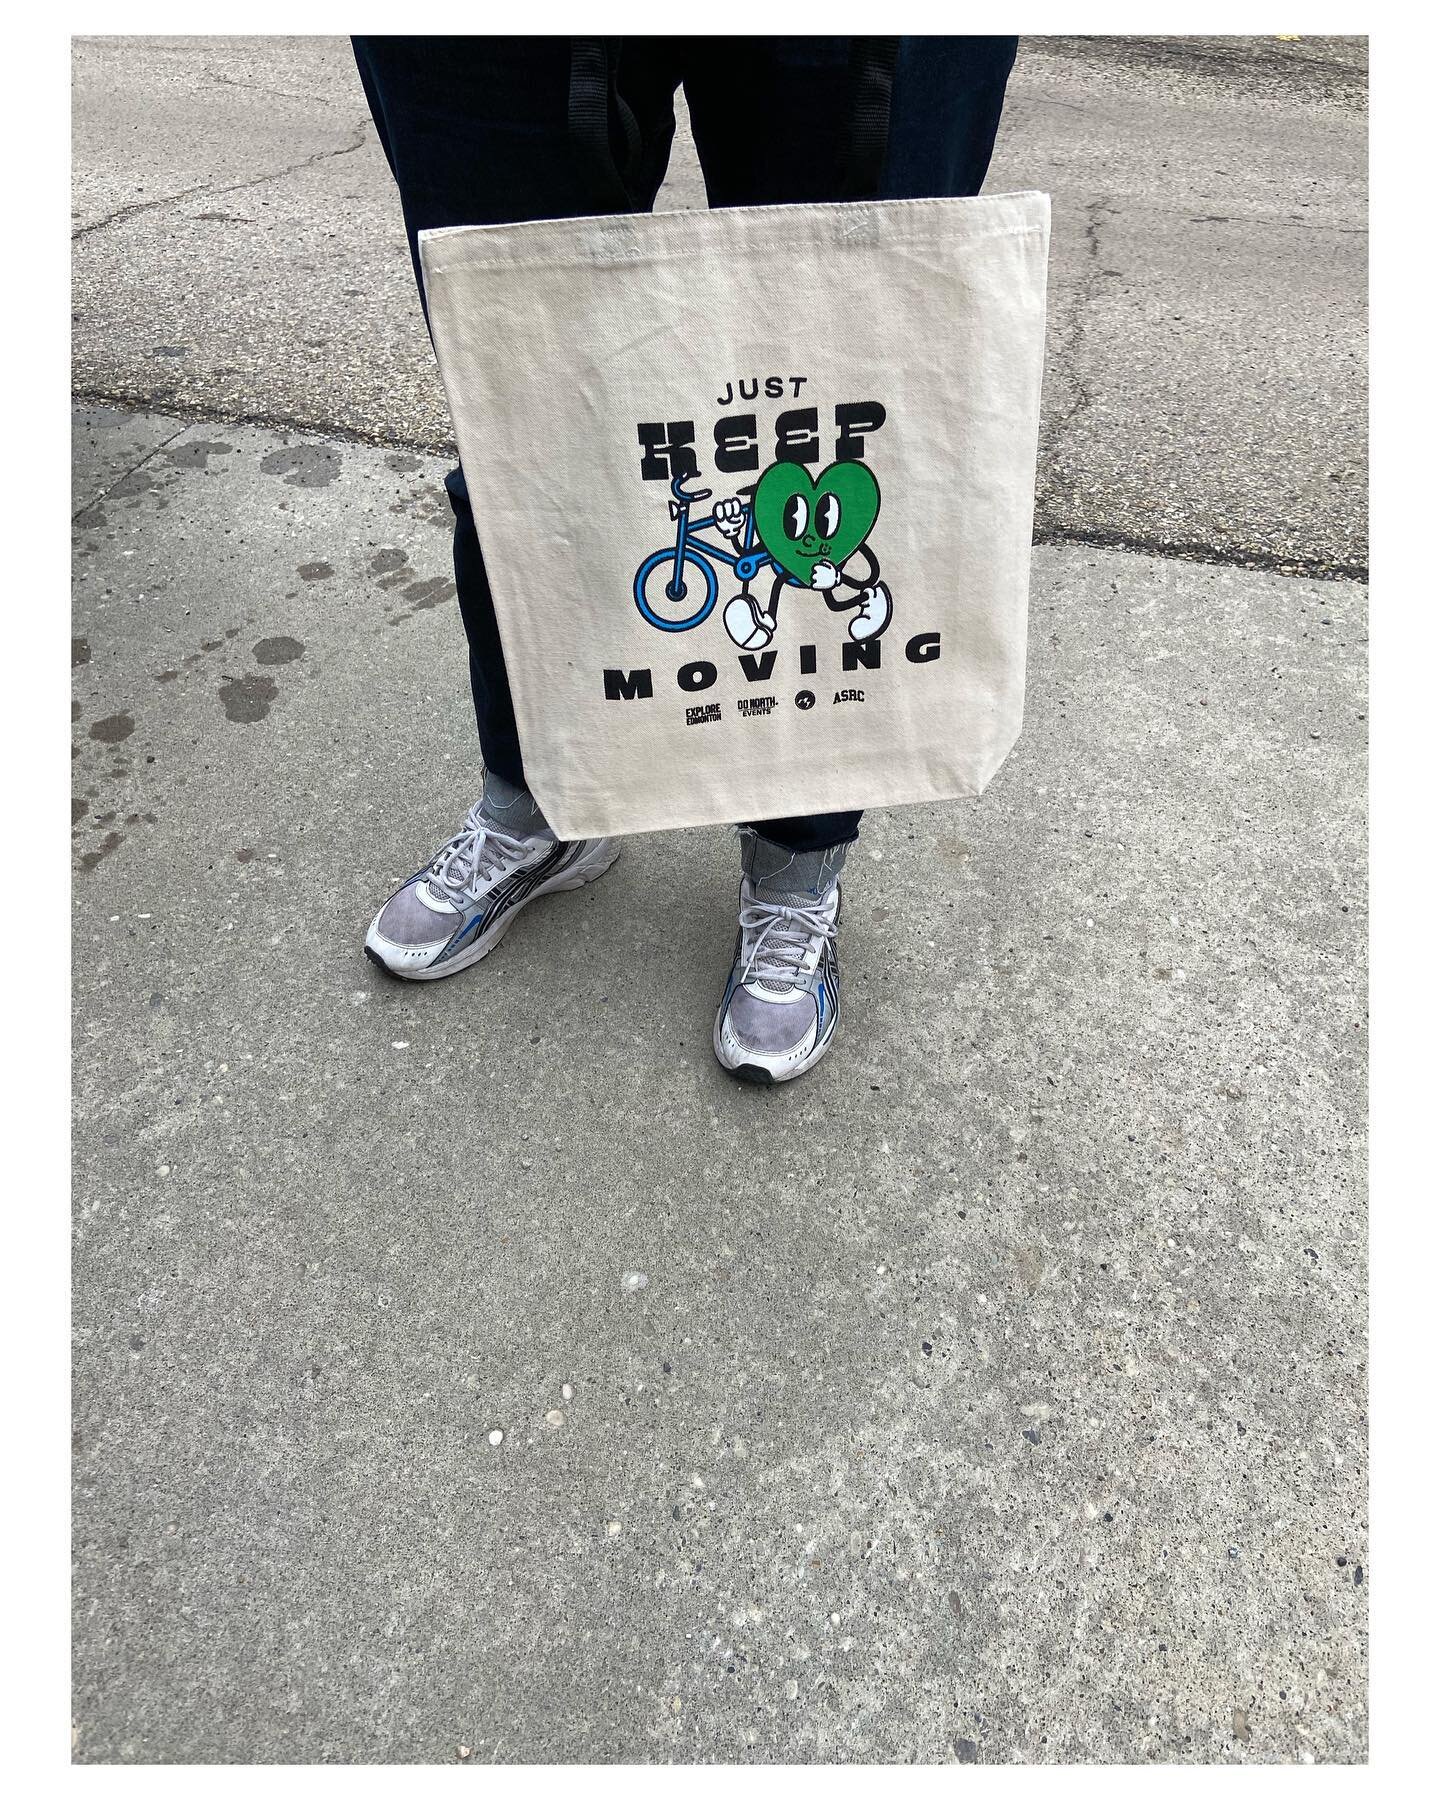 Proud to create these custom totes for @antisocialrunning and @exploreedmonton for the big race! #madeinEdmonton